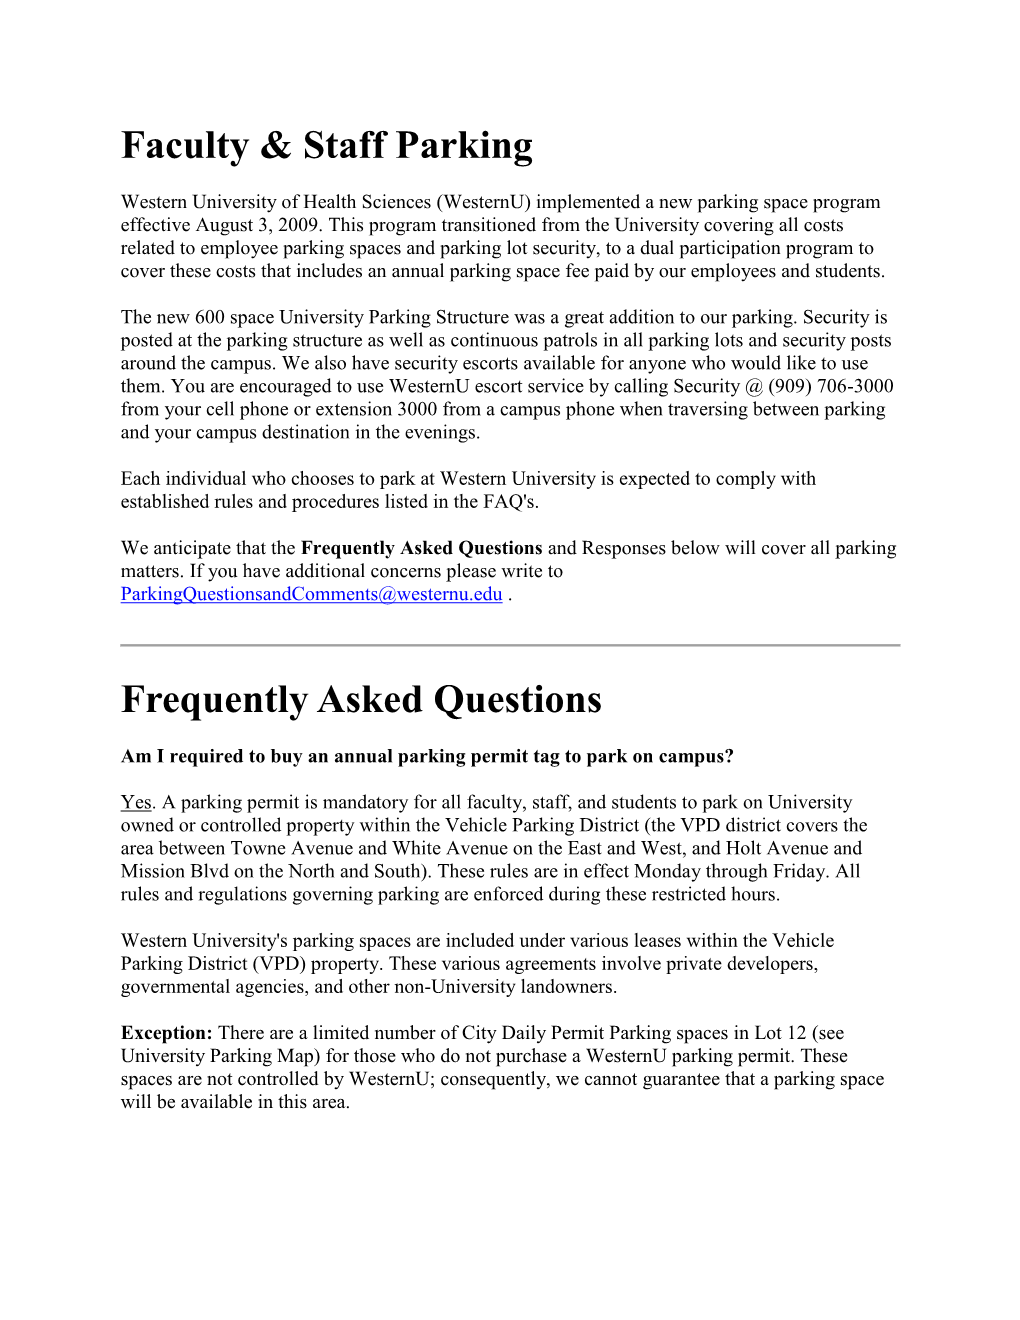 Faculty & Staff Parking Frequently Asked Questions